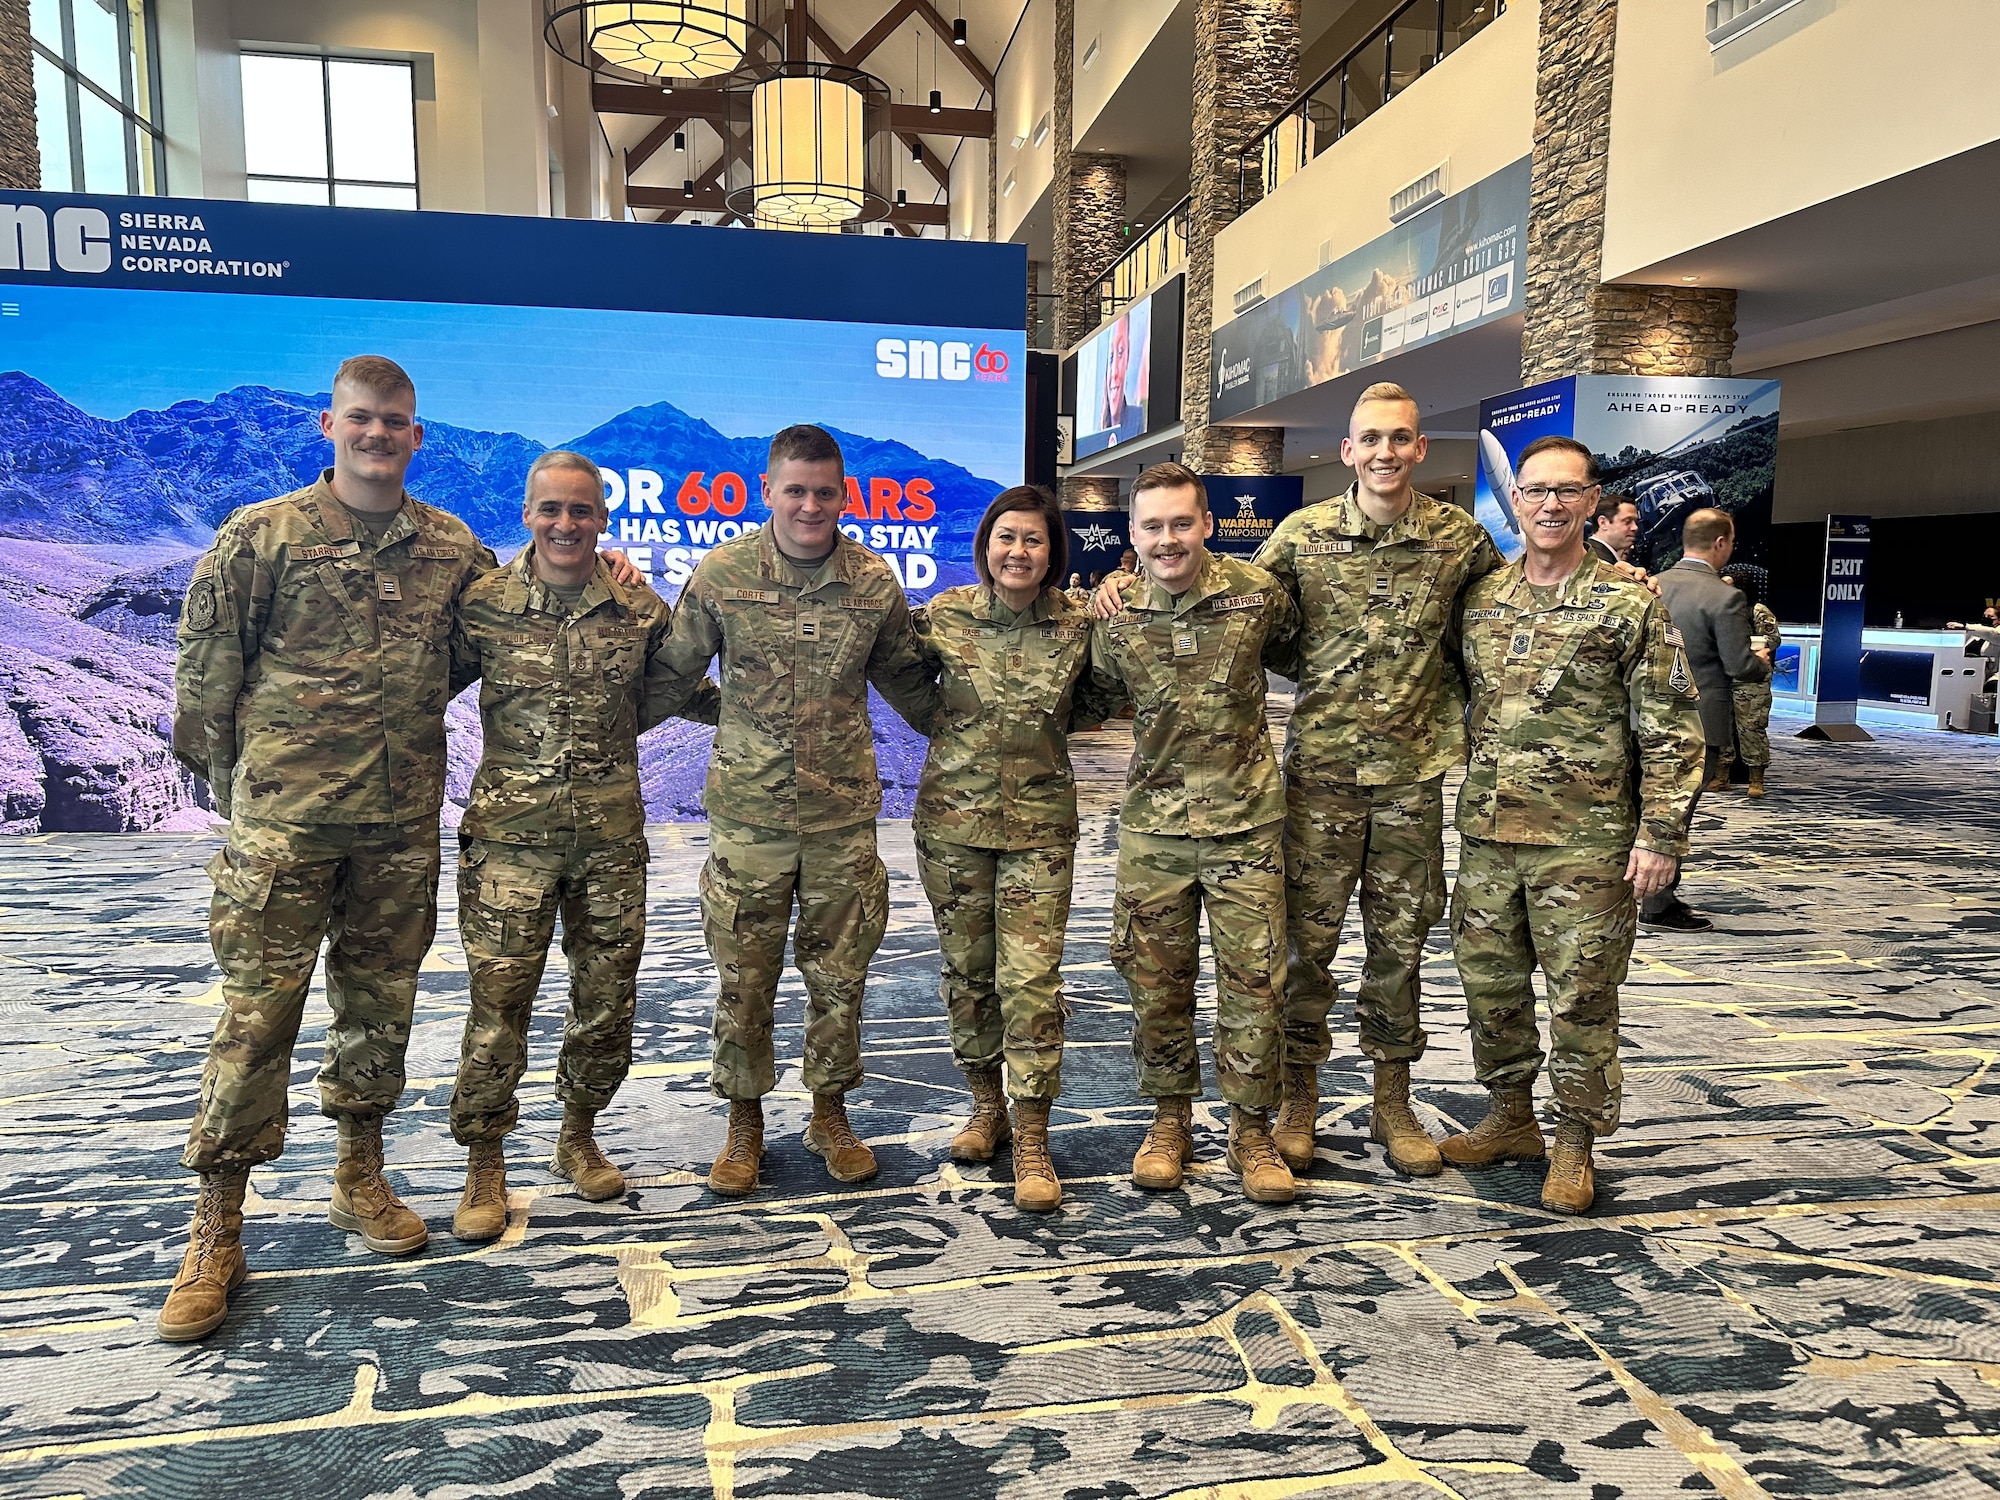 Cadets from Air Force ROTC Detachment 780 at South Dakota State University pose with Chief Master Sgt. of the Air Force JoAnne Bass (center) at the Air and Space Forces Association Air Warfare Symposium in Aurora, Colorado, March 8, 2023. The cadets were given the opportunity to talk with senior Air Force officers and enlisted leaders.